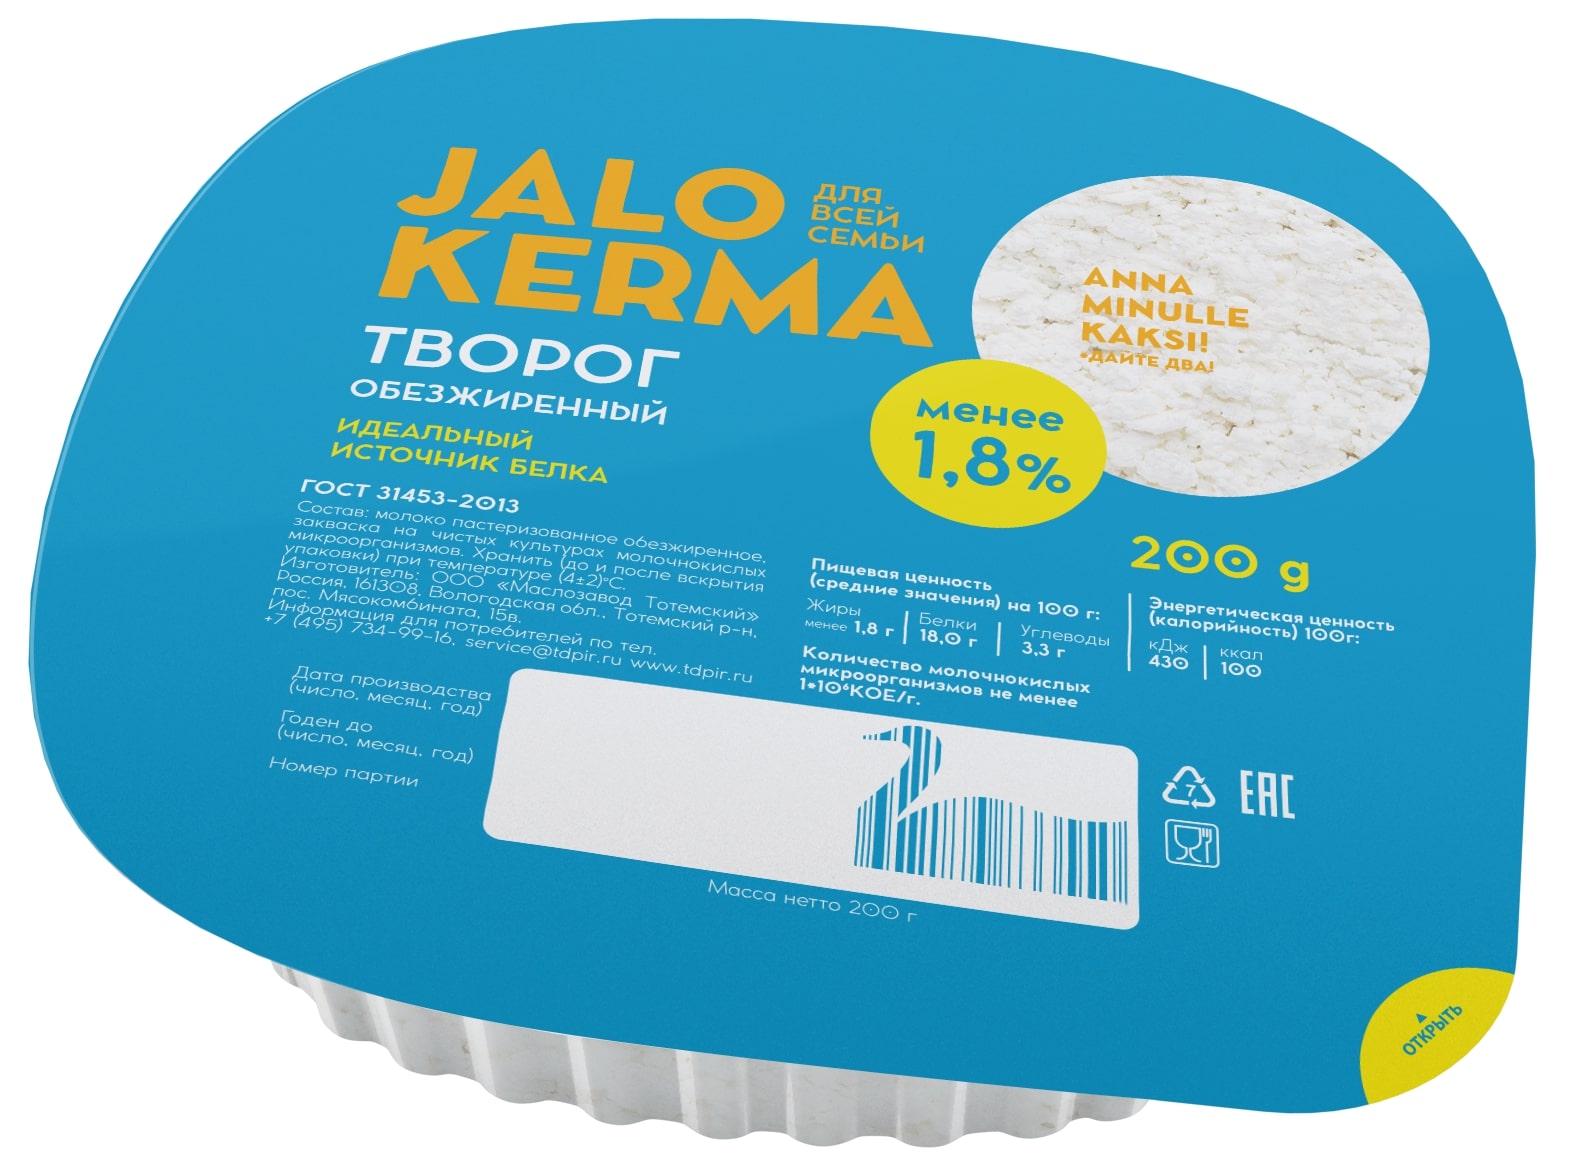 Fat-free cottage cheese "JALO KERMA" 200 g